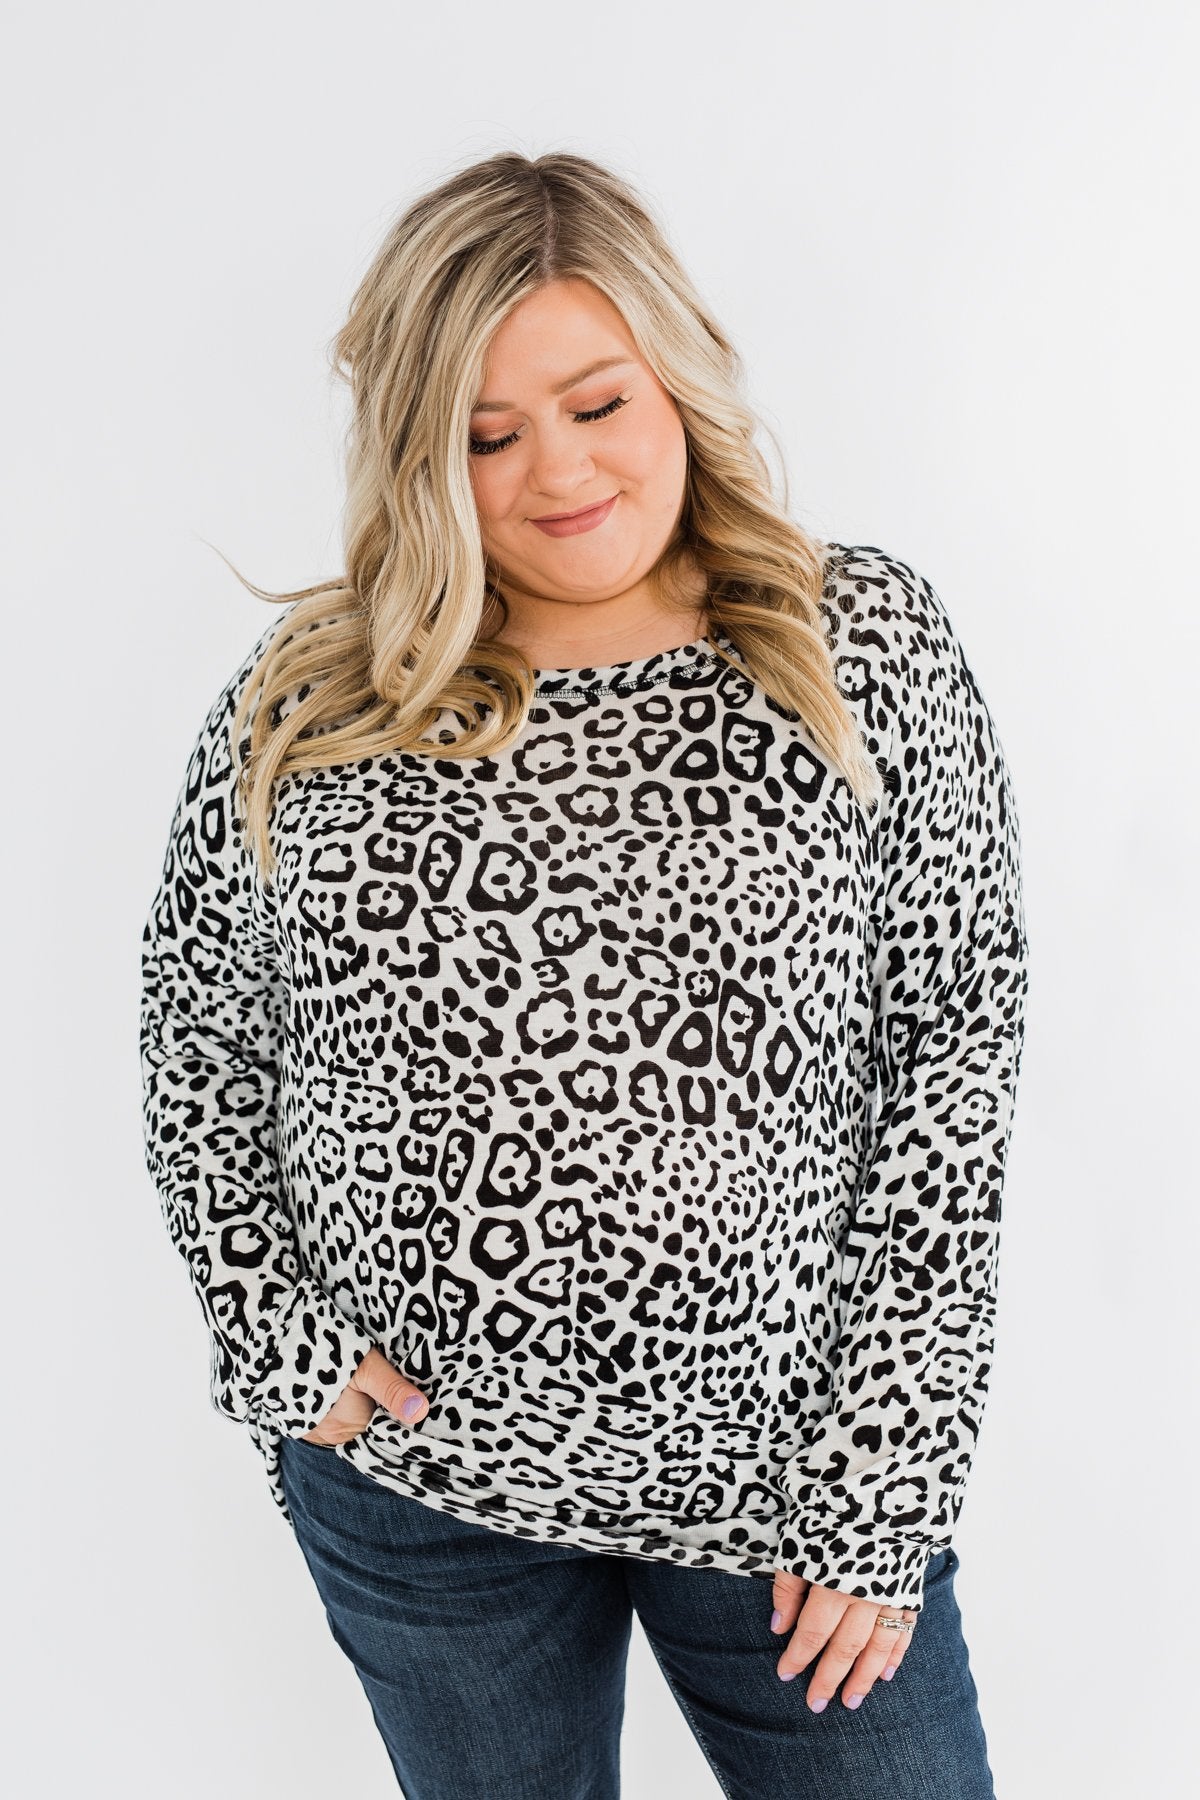 Wild About You Animal Print Top- Off White & Black